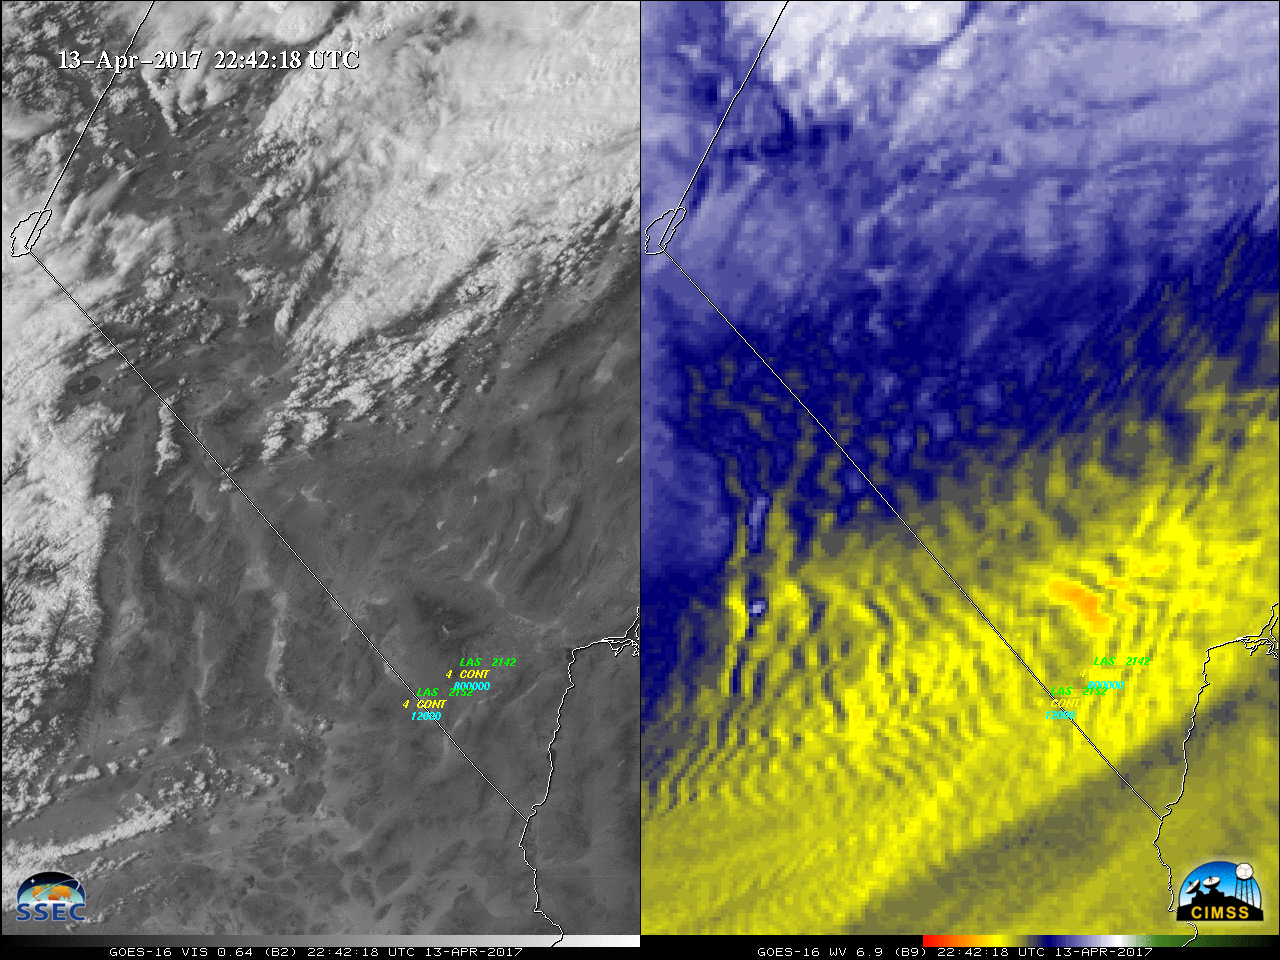 GOES-16 Visible (0.64 µm, left) and Water Vapor (6.9 µm, right) images, with pilot reports of turbulence [click to play animation]